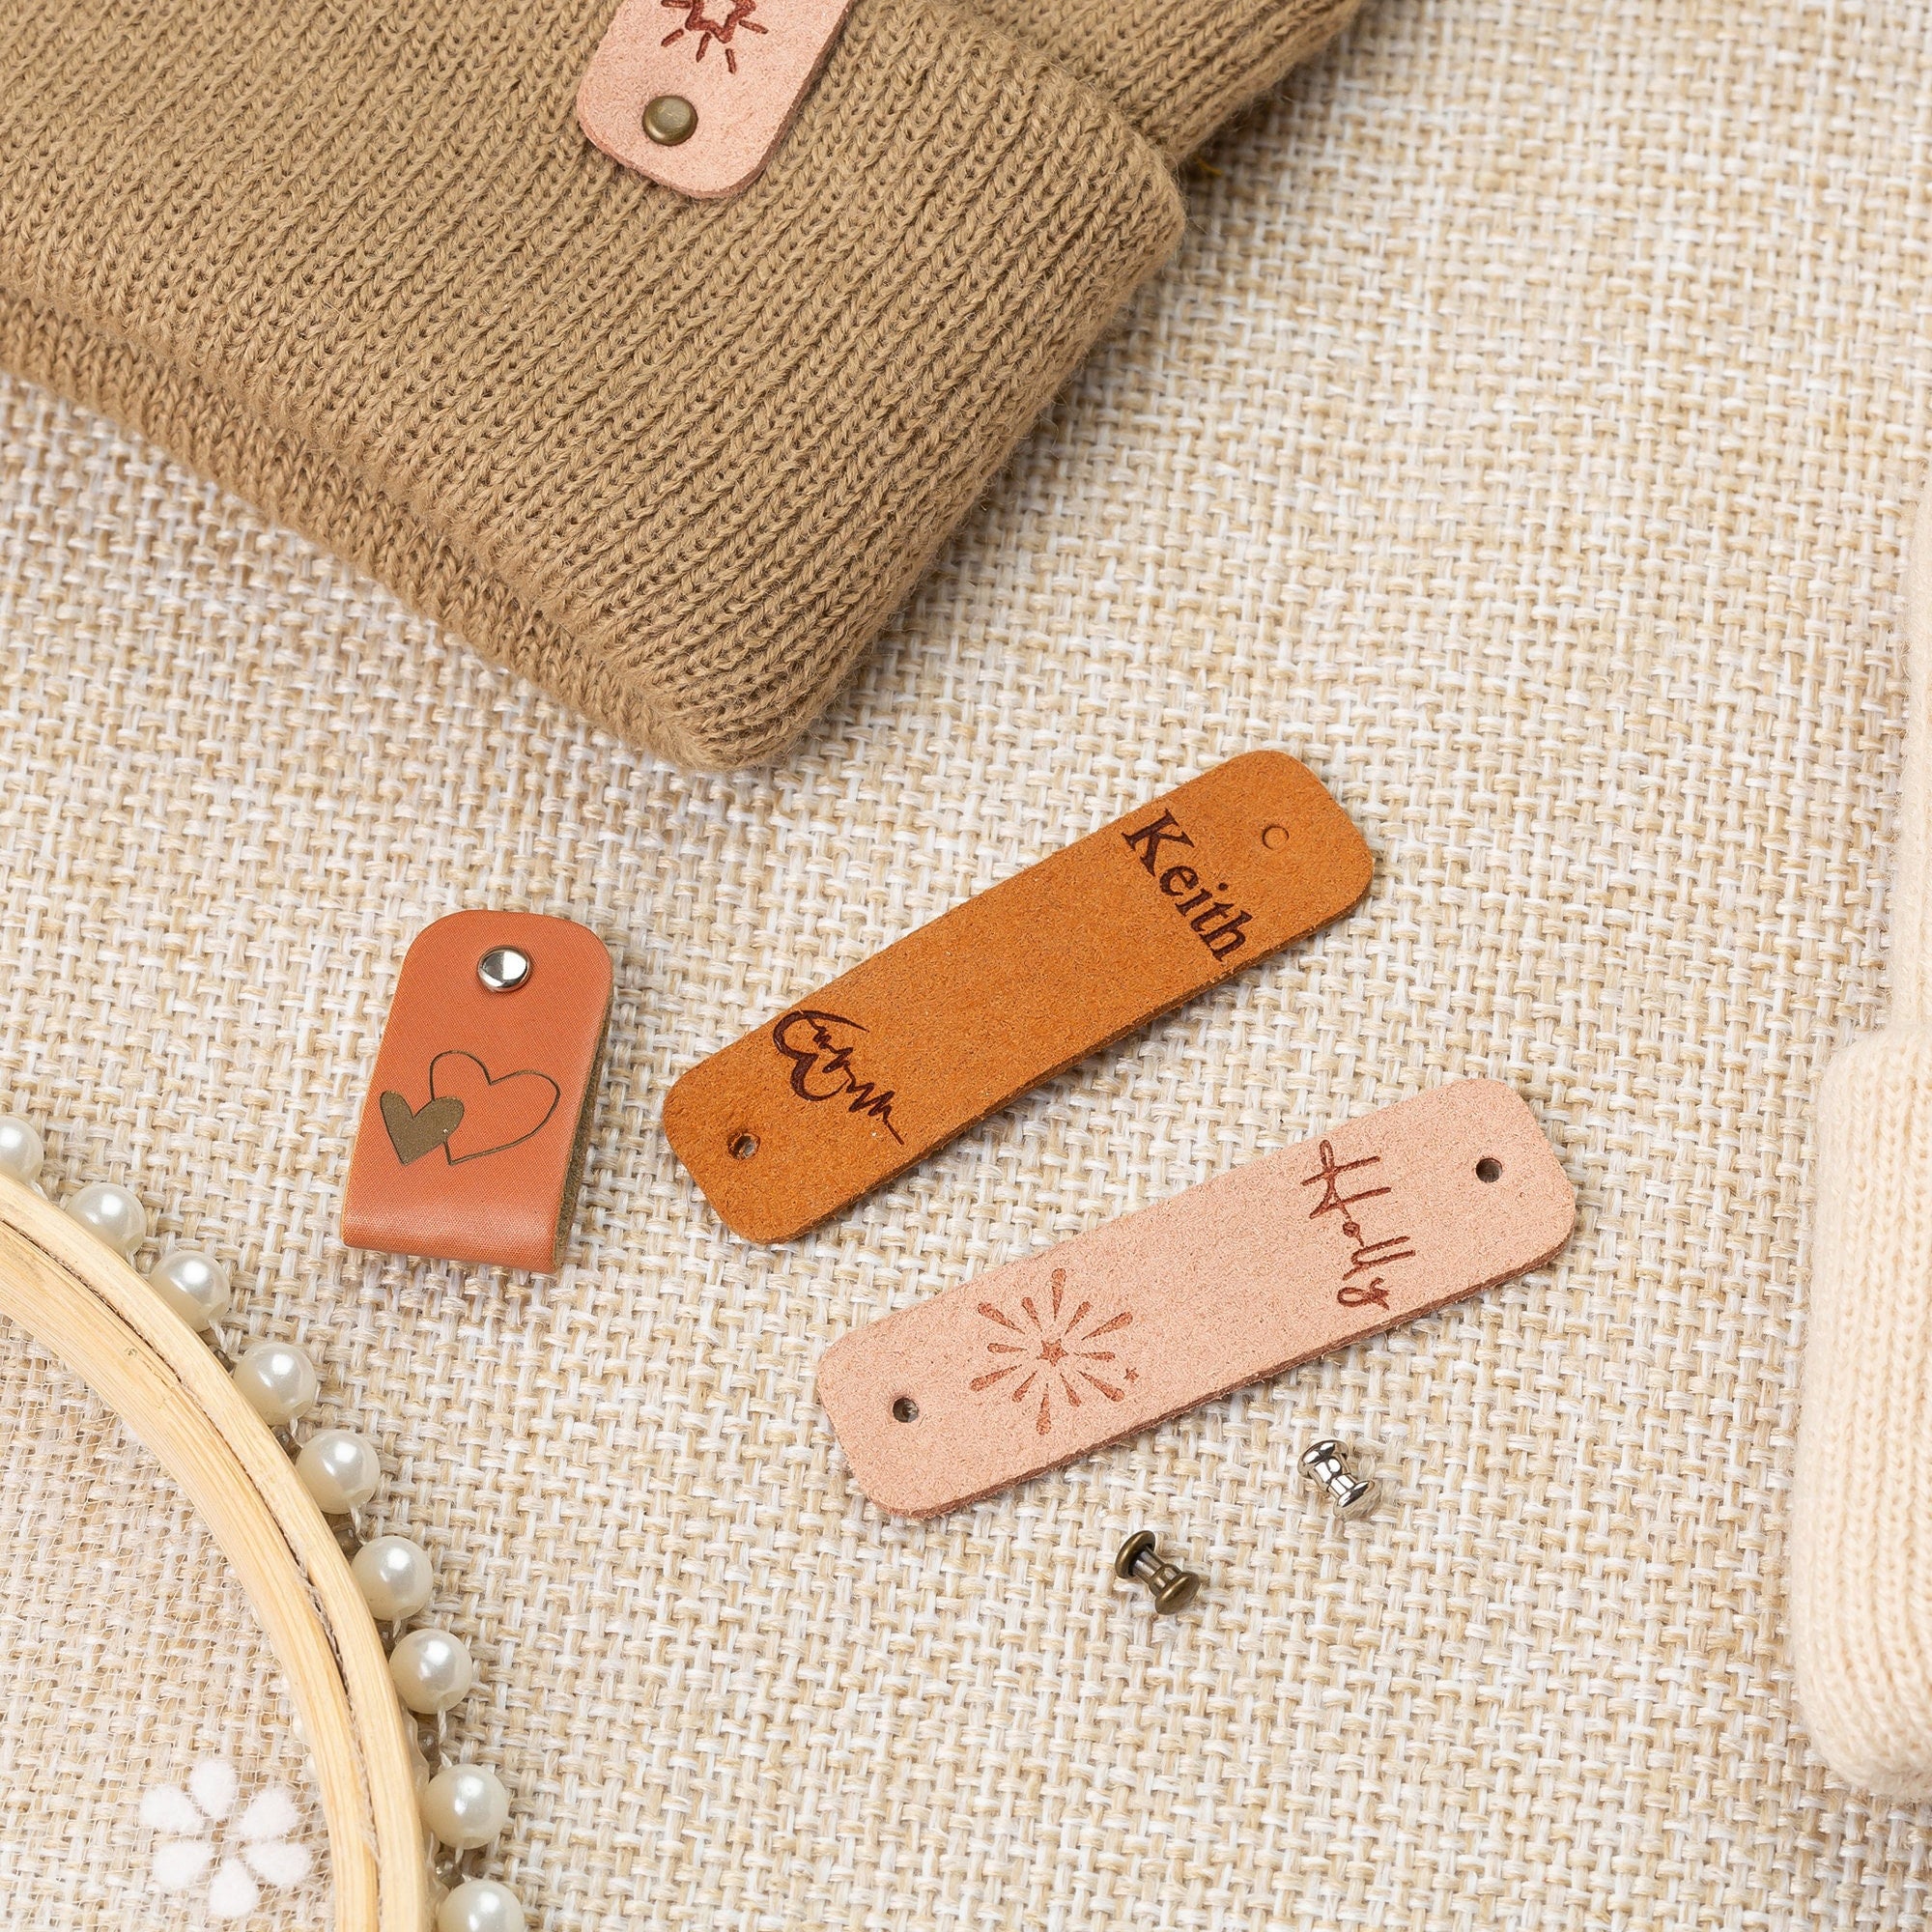 Custom Tags 2.75 X 0.75 Inch for Knits and Crochet, Faux Leather Labels for Handmade  Items, Leather Tags With Rivets, Tags for Knitted Hats 